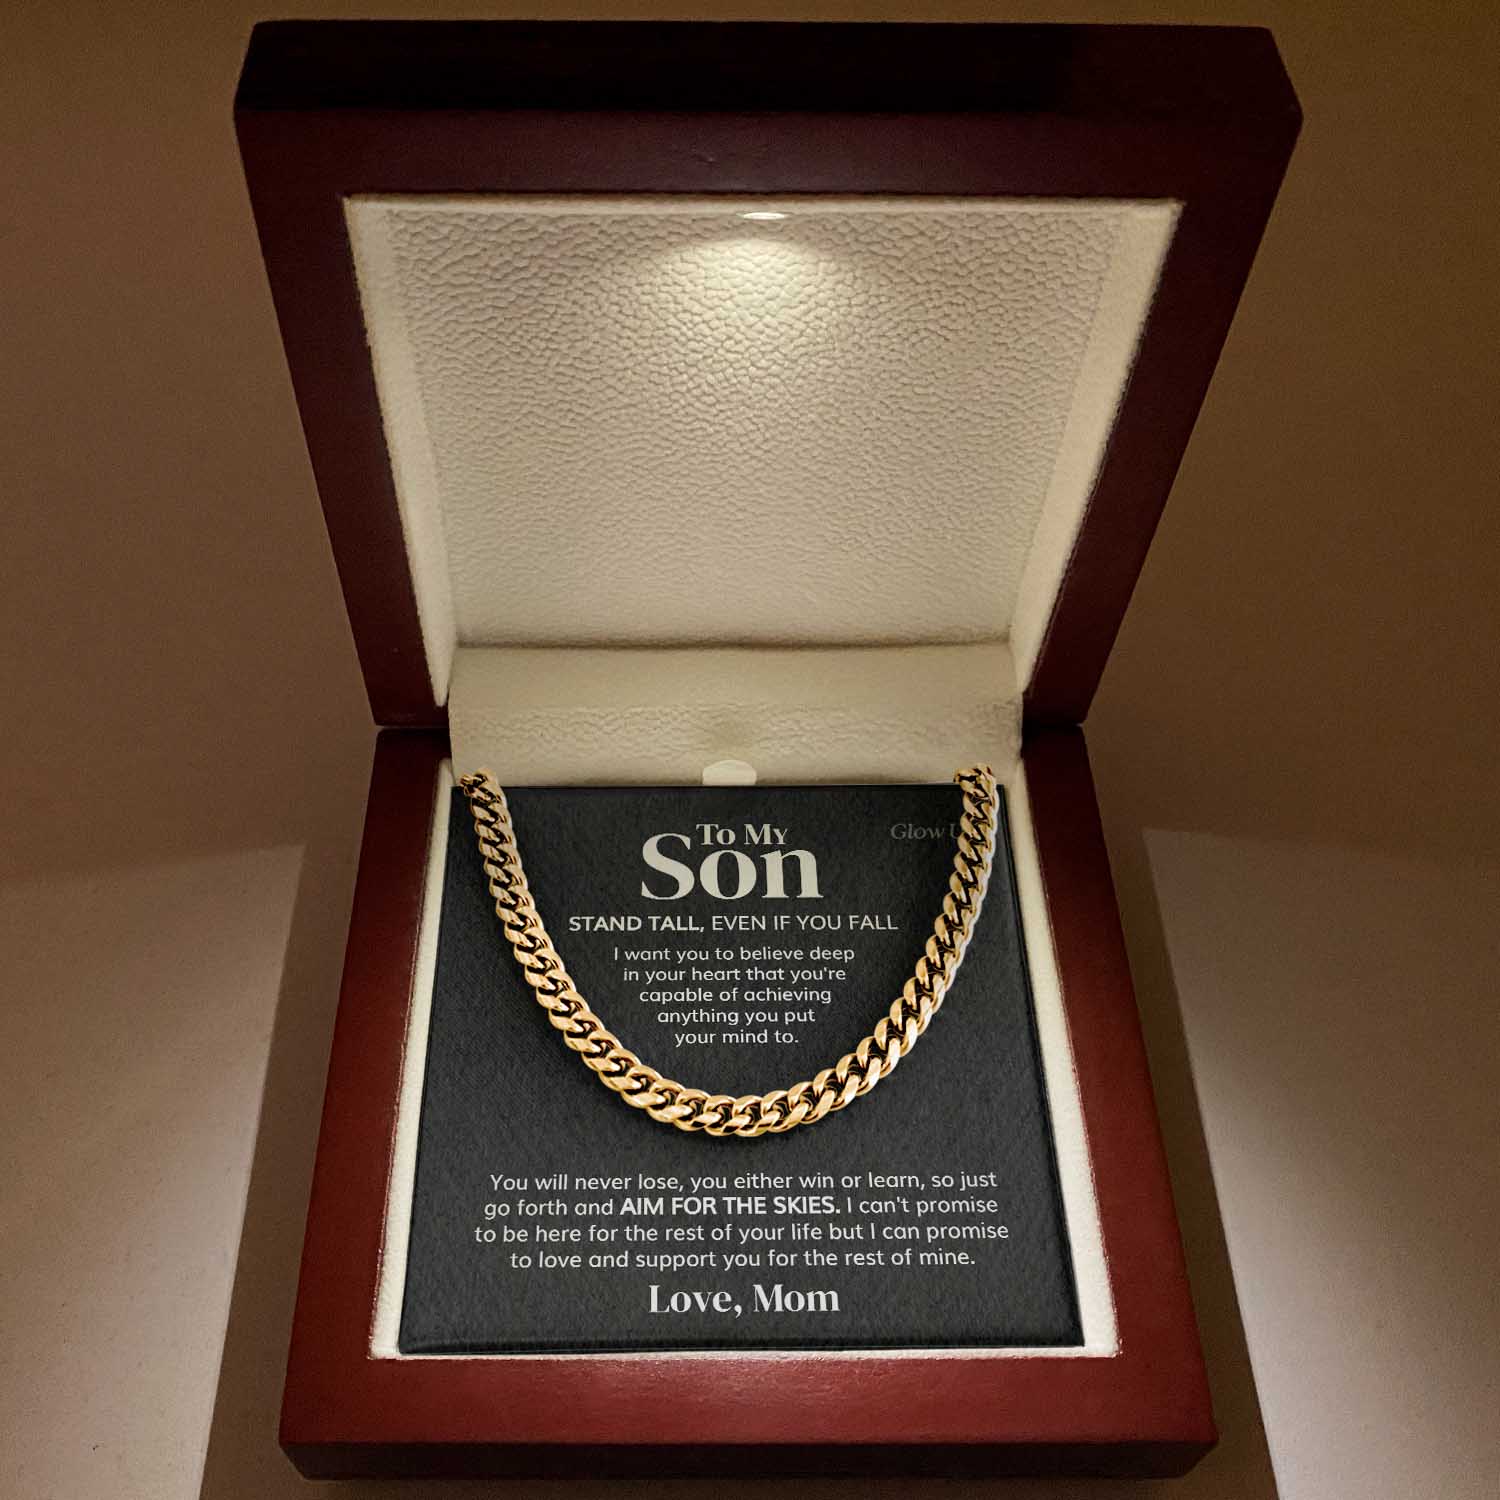 ShineOn Fulfillment Jewelry 14K Yellow Gold Finish / Luxury LED Box To my Son - Aim for the skies - Cuban Link Chain Necklace